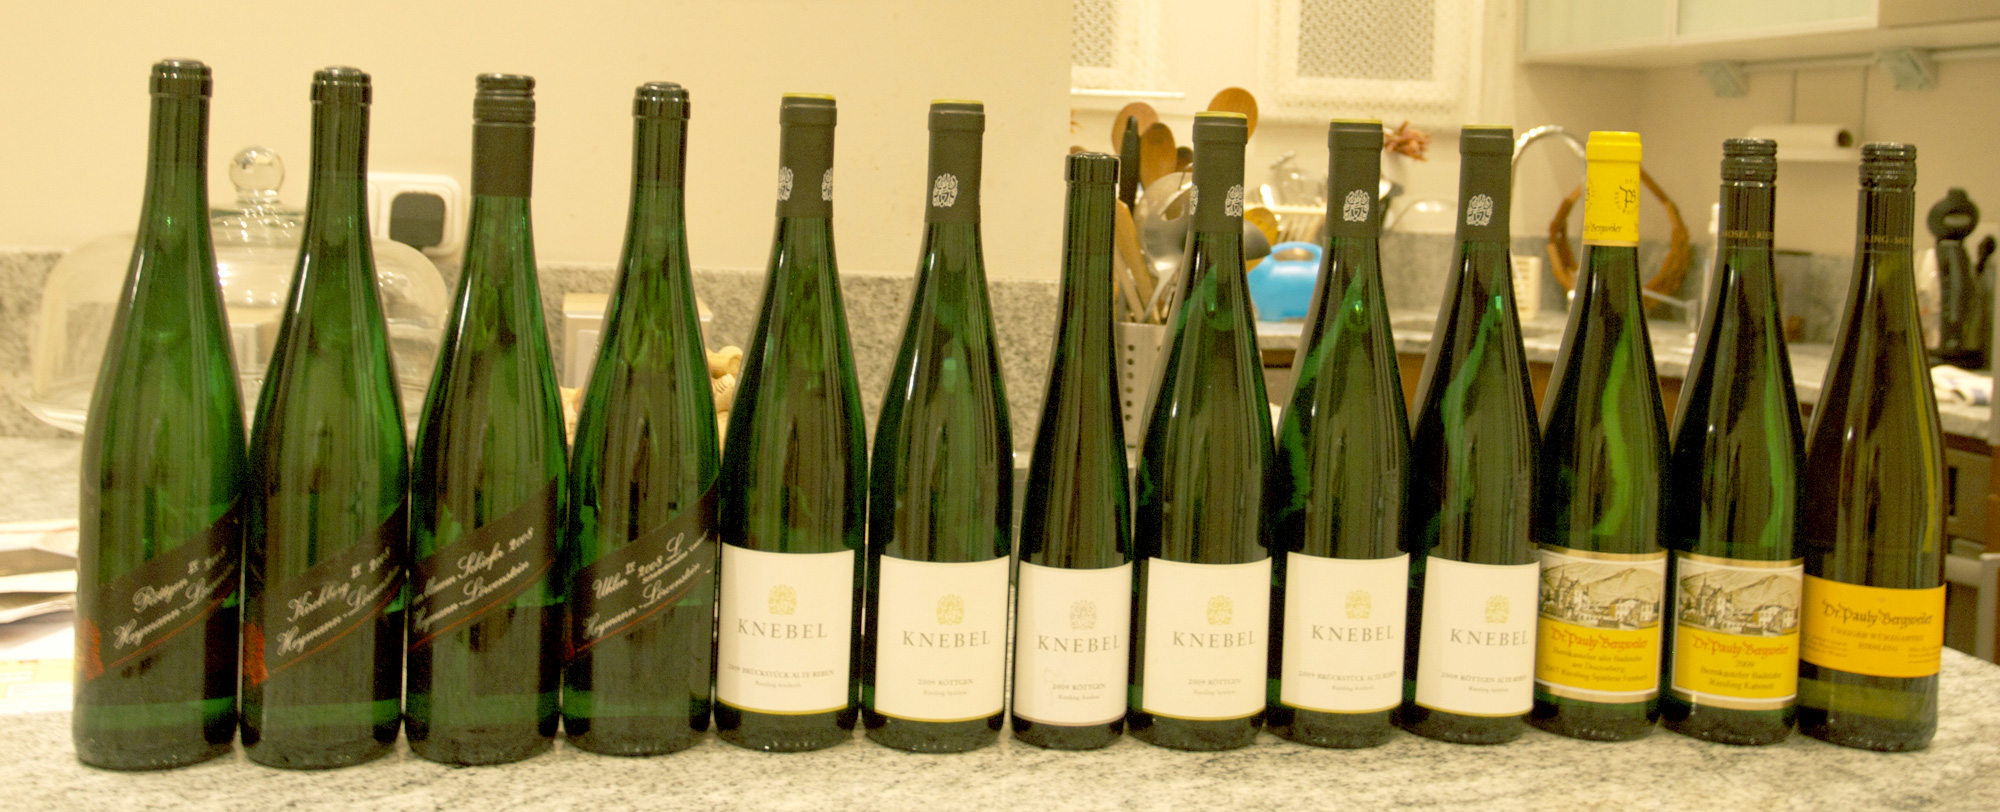 A few souvenirs from the Mosel